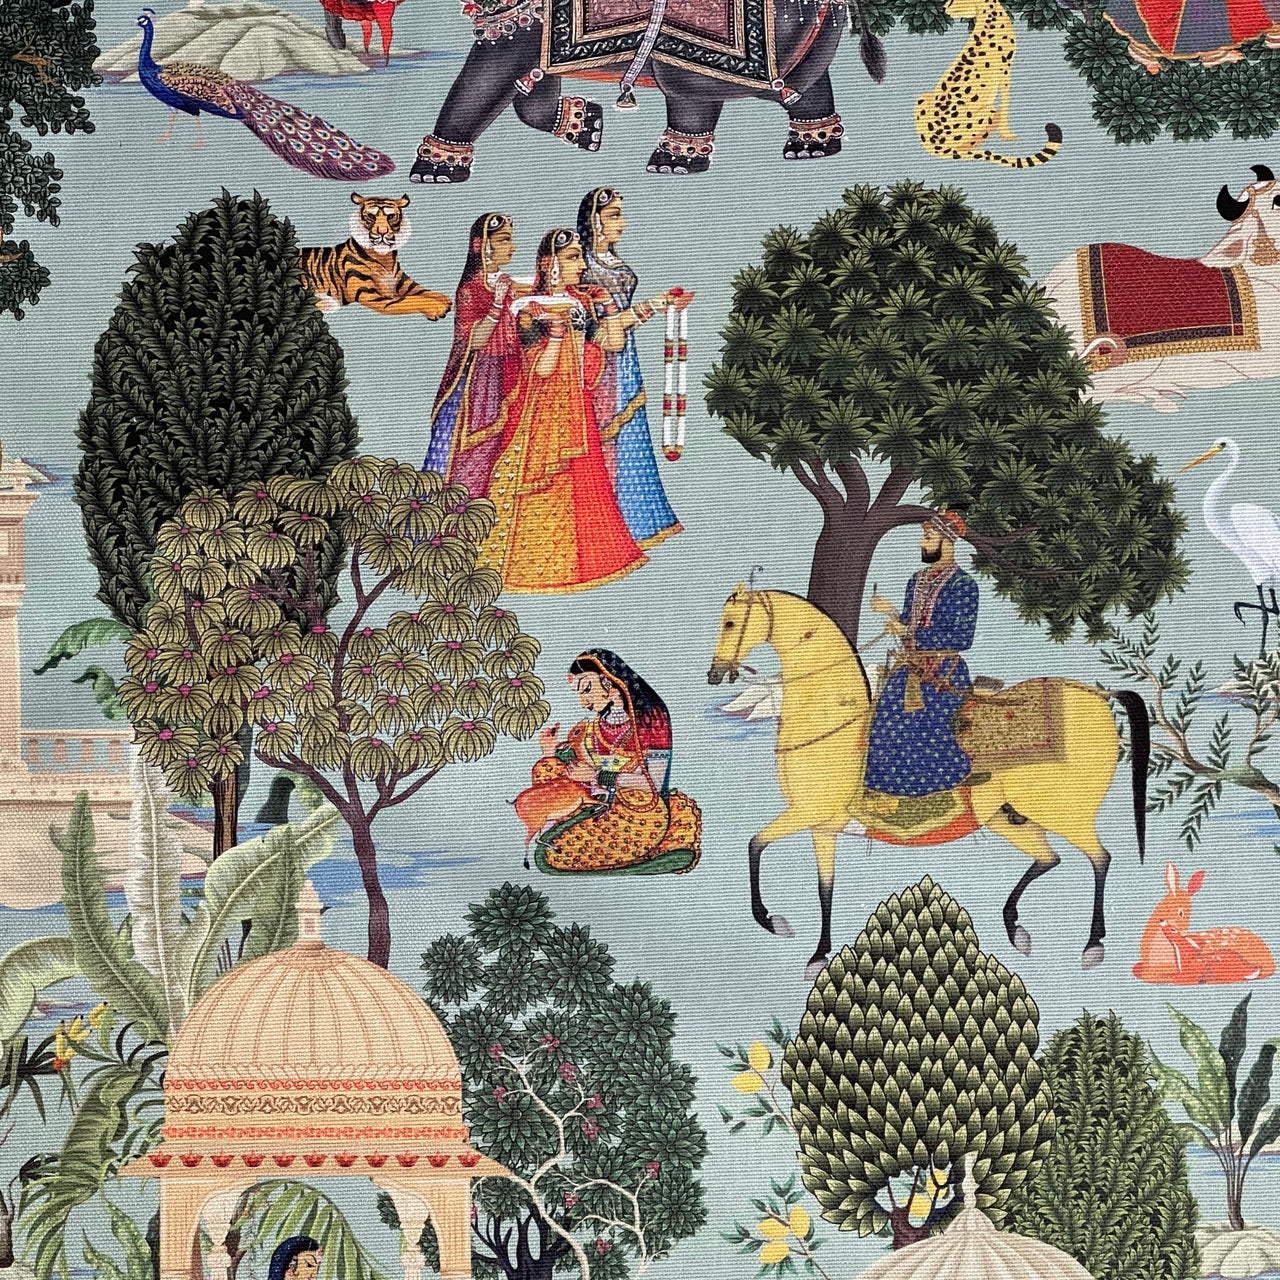 Regal Indian Tales: Cotton Fabric Inspired by Maharajahs' Era with Elephants & Horse Pattern in Duck Egg